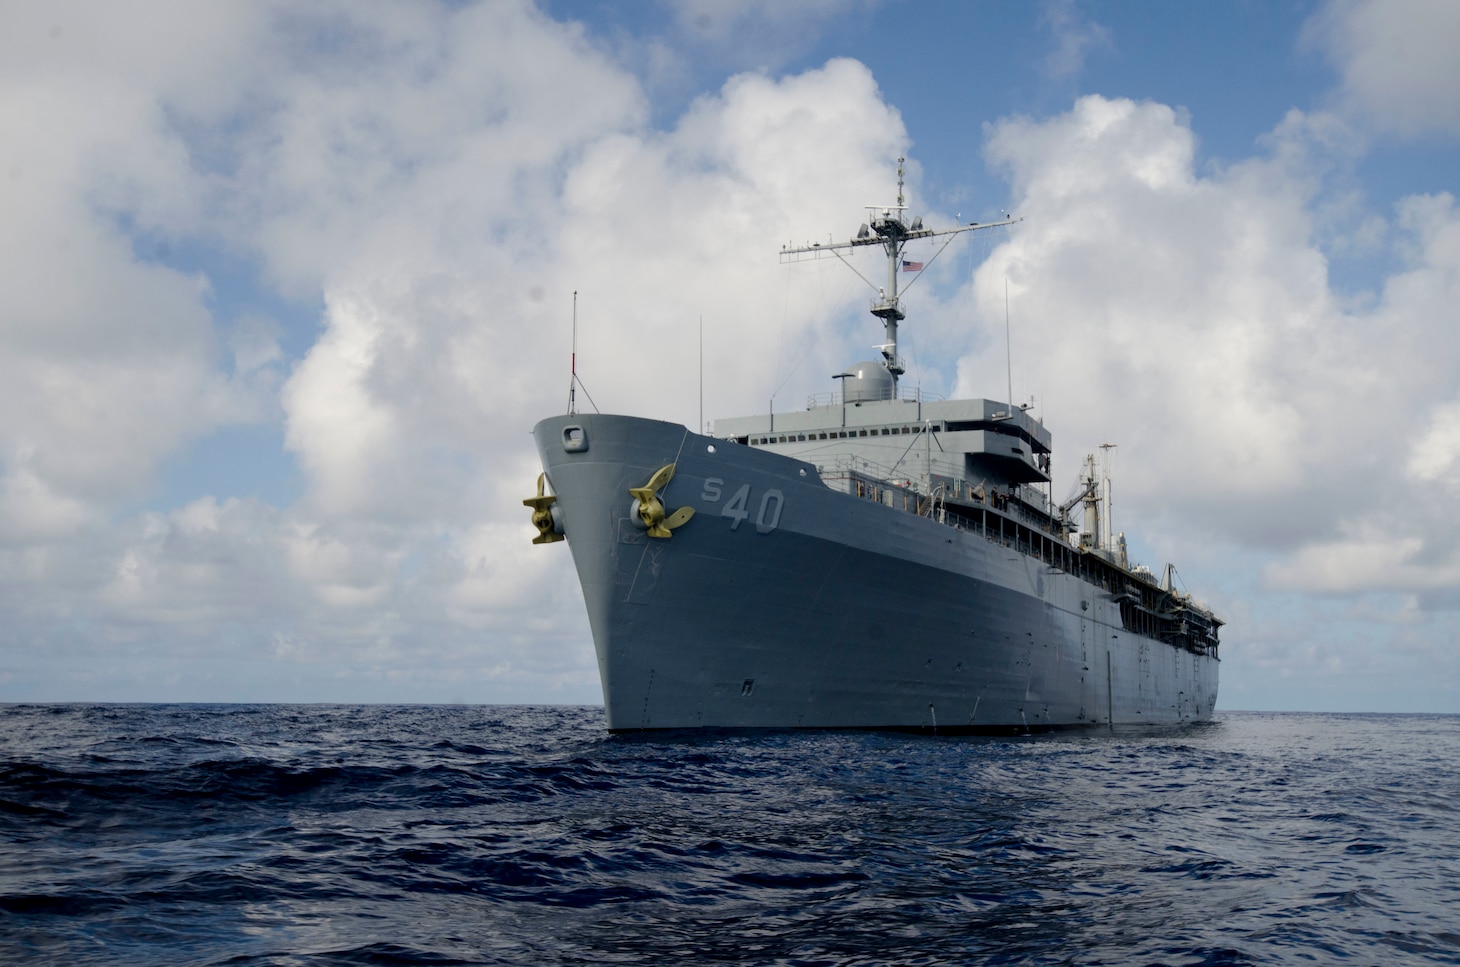 171229-N-DA434-211 PACIFIC OCEAN (Dec. 29, 2017) The submarine tender USS Frank Cable (AS 40) sails the Pacific Ocean, during a man-overboard drill. Frank Cable, forward-deployed to Guam, repairs, rearms and reprovisions deployed U.S. Naval Forces in the Indo-Asia-Pacific region. (U.S. Navy photo by Mass Communication Specialist 3rd Class Alana Langdon)